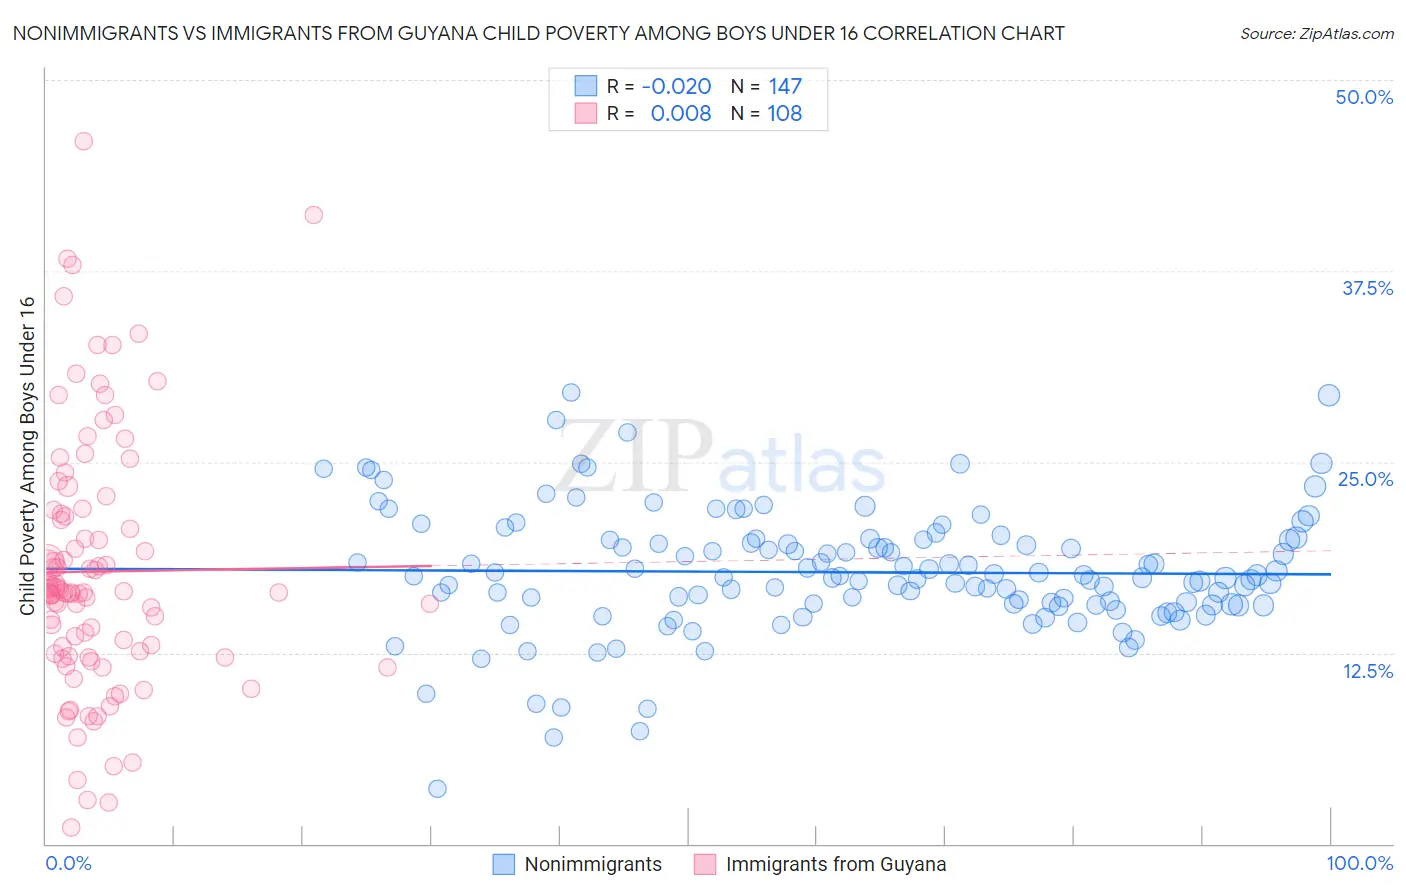 Nonimmigrants vs Immigrants from Guyana Child Poverty Among Boys Under 16